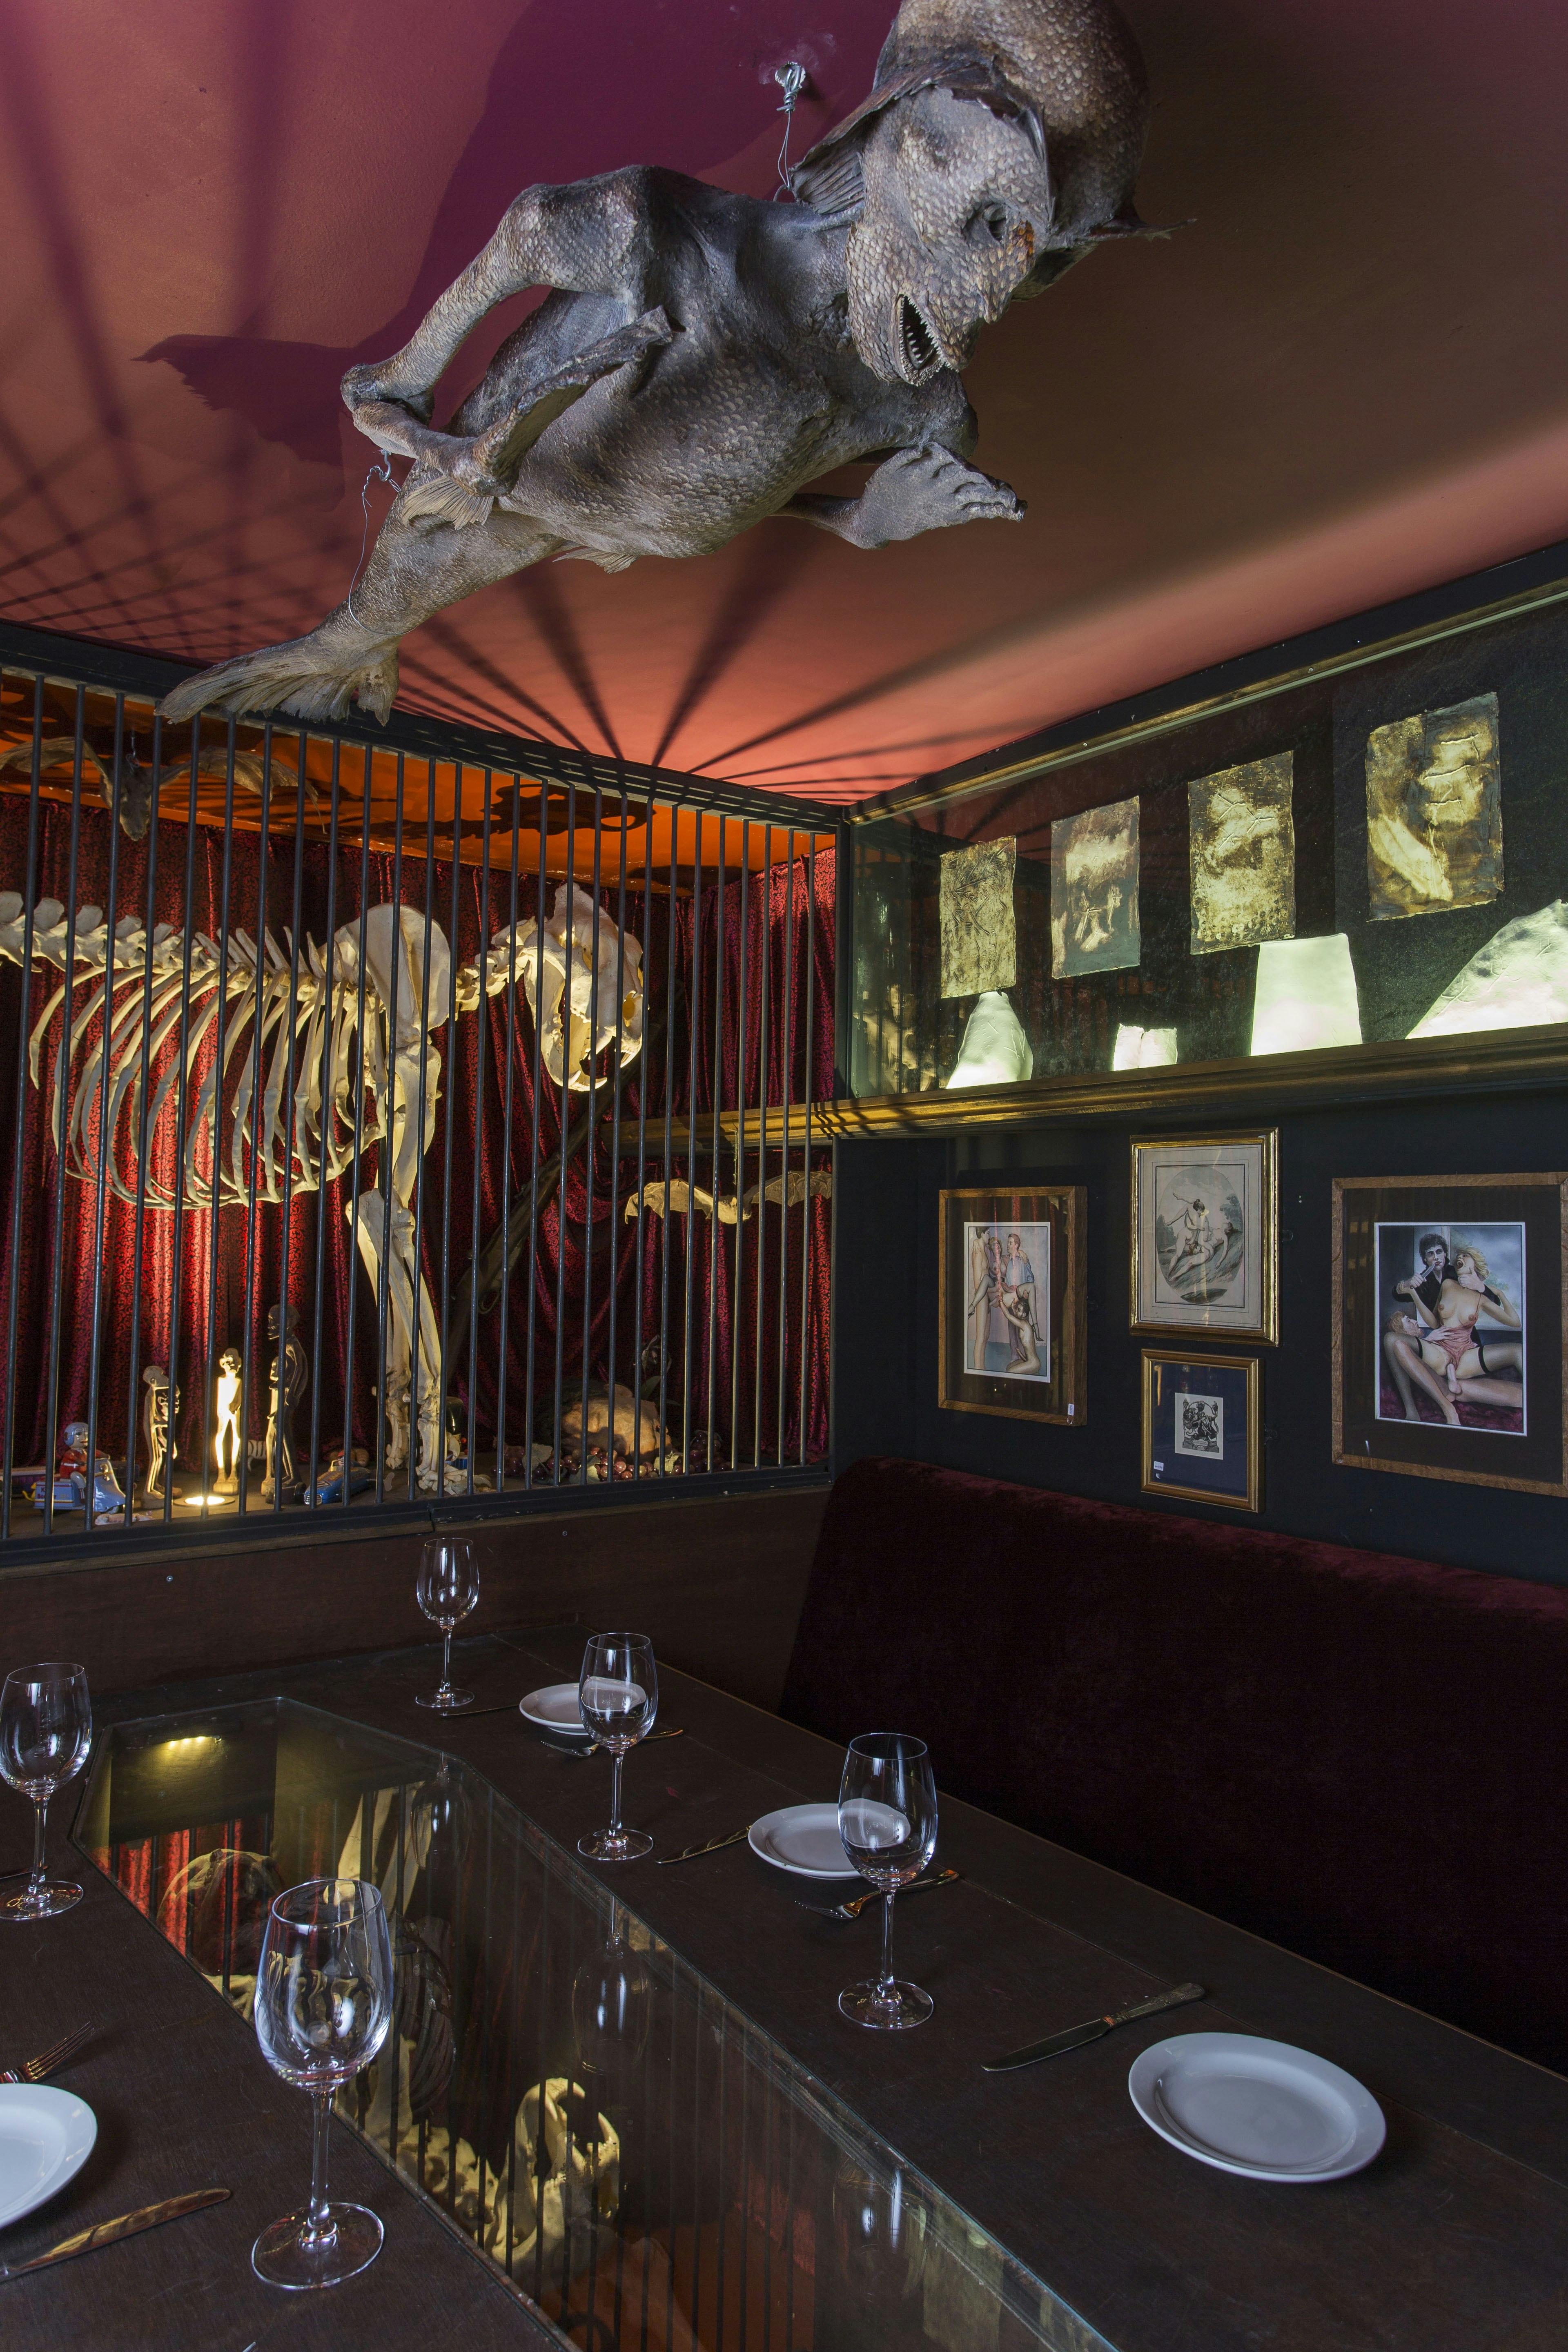 A lion skeleton in a cage and a sea monster model hanging from the ceiling of the Last Tuesday Society bar in east London.